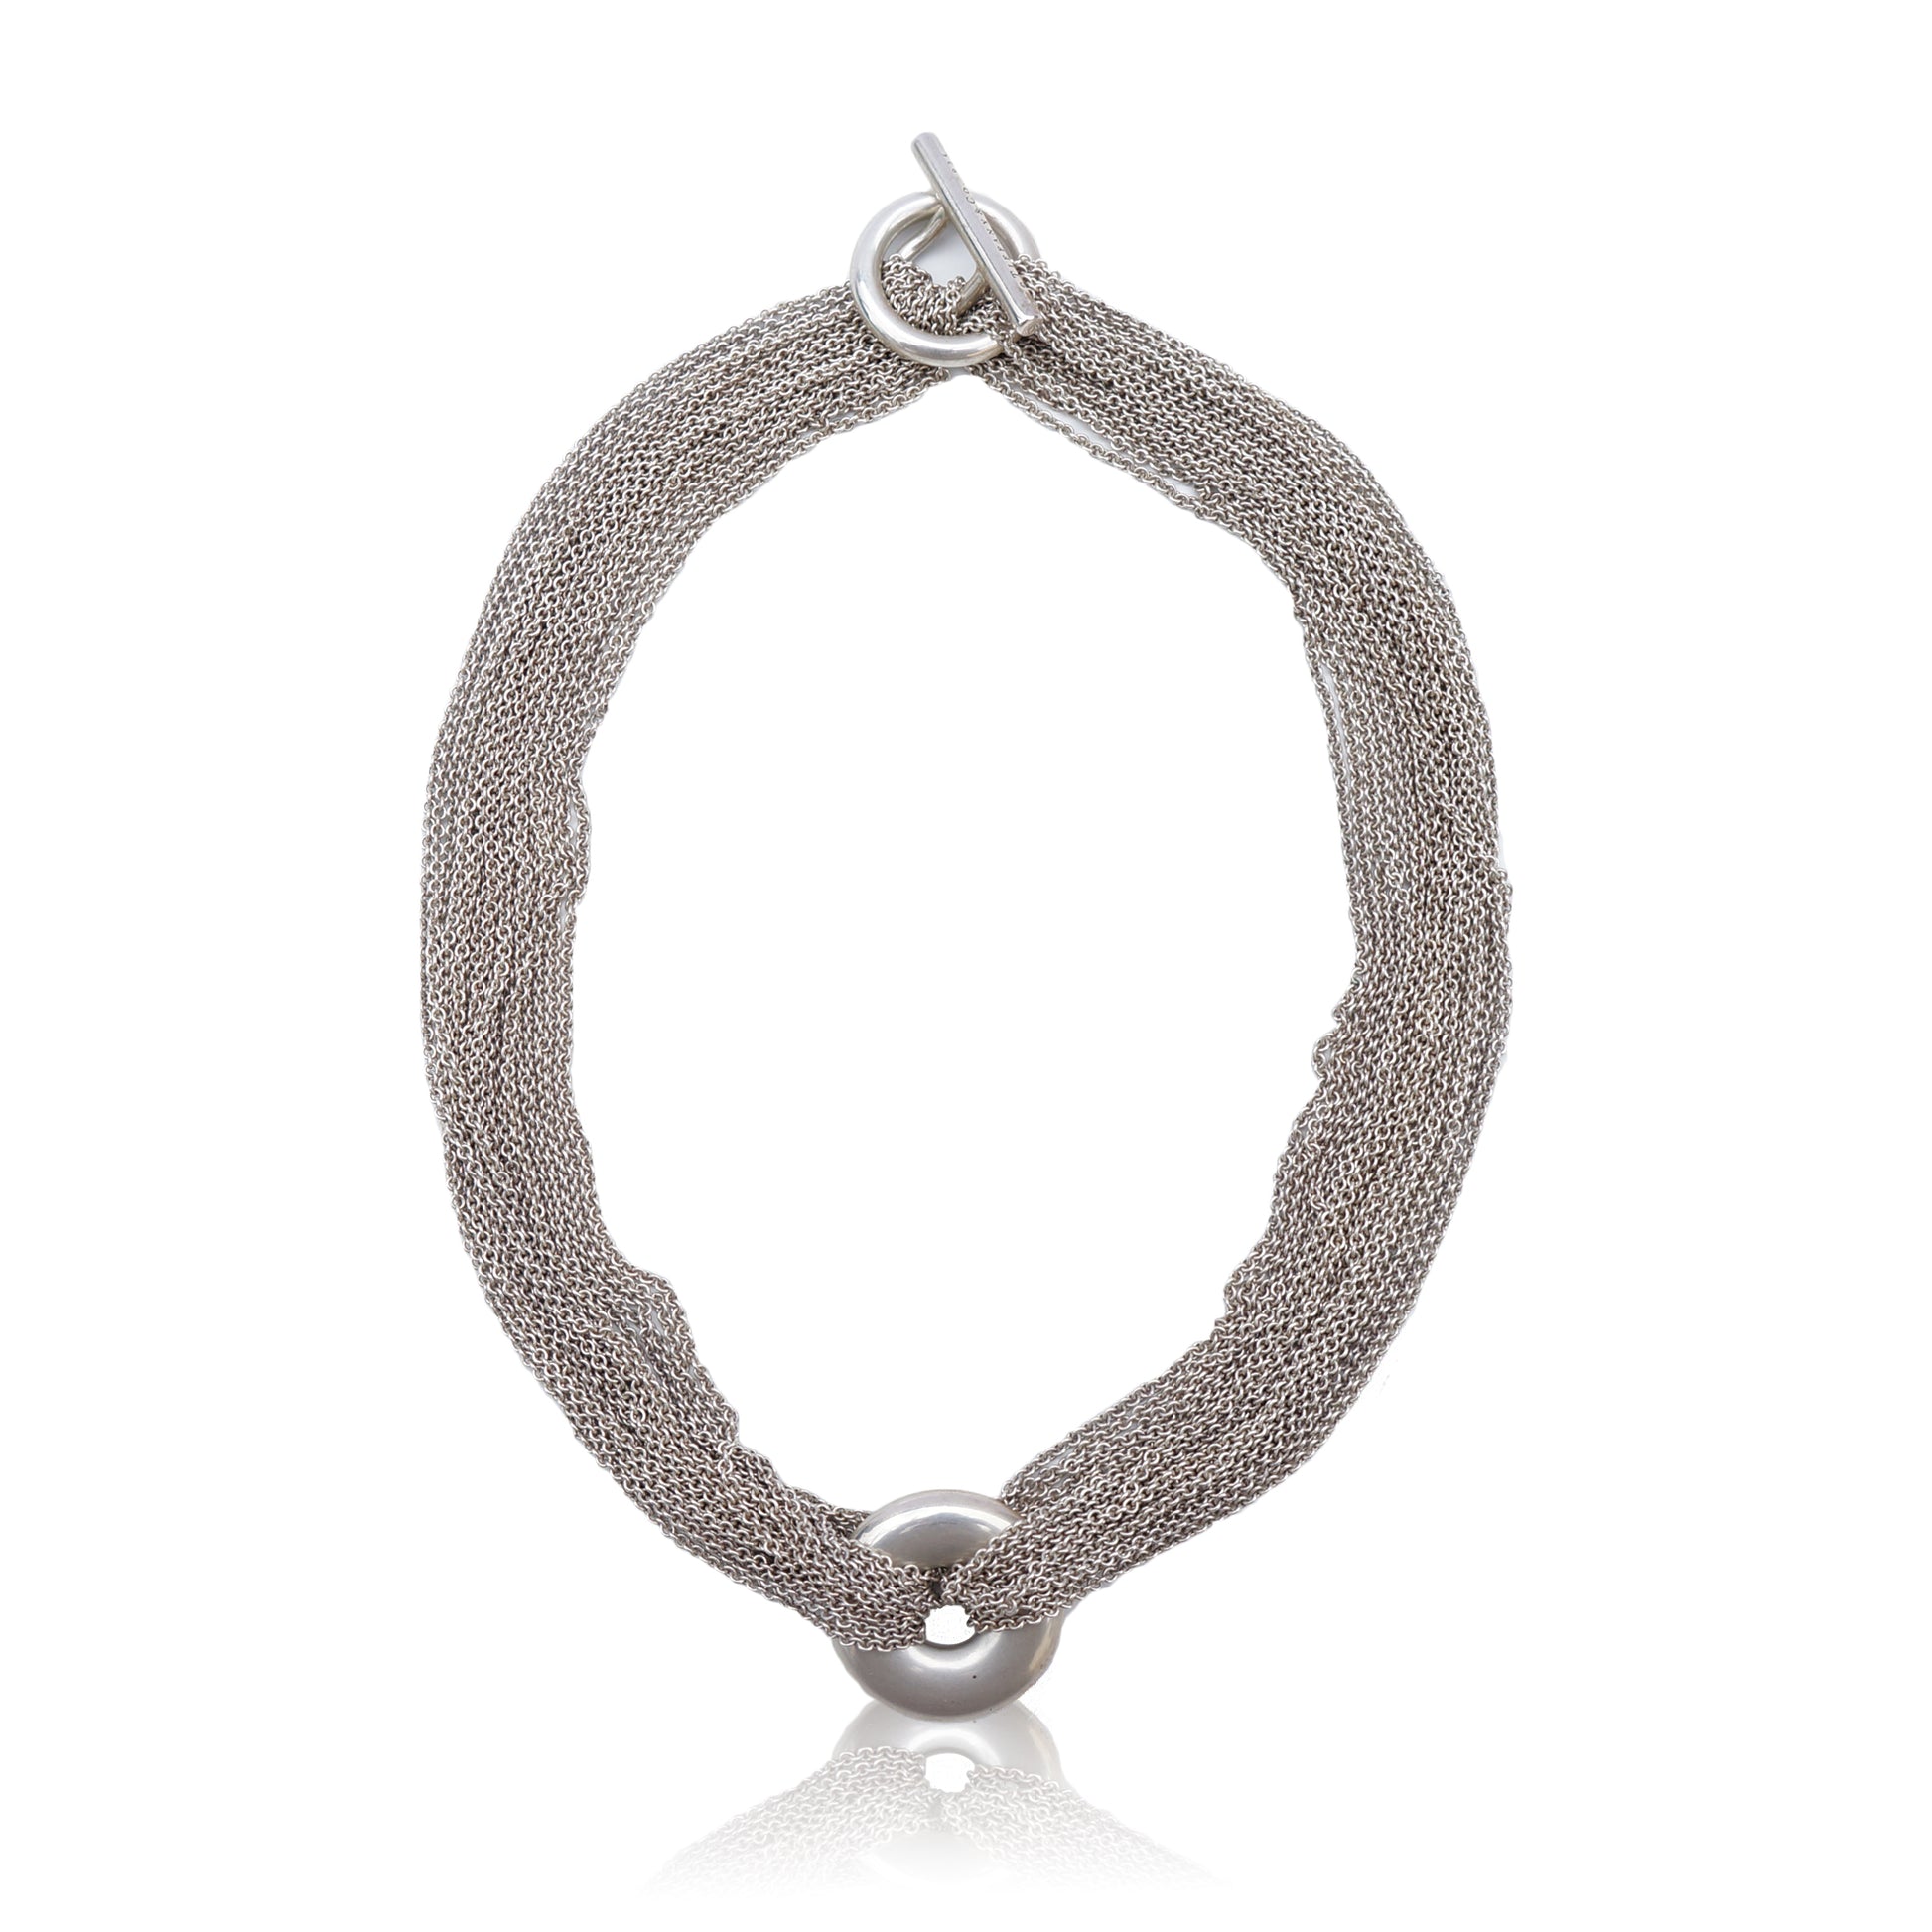 TIFFANY & CO. STERLING SILVER MESH CIRCLE NECKLACE - leefluxury.com